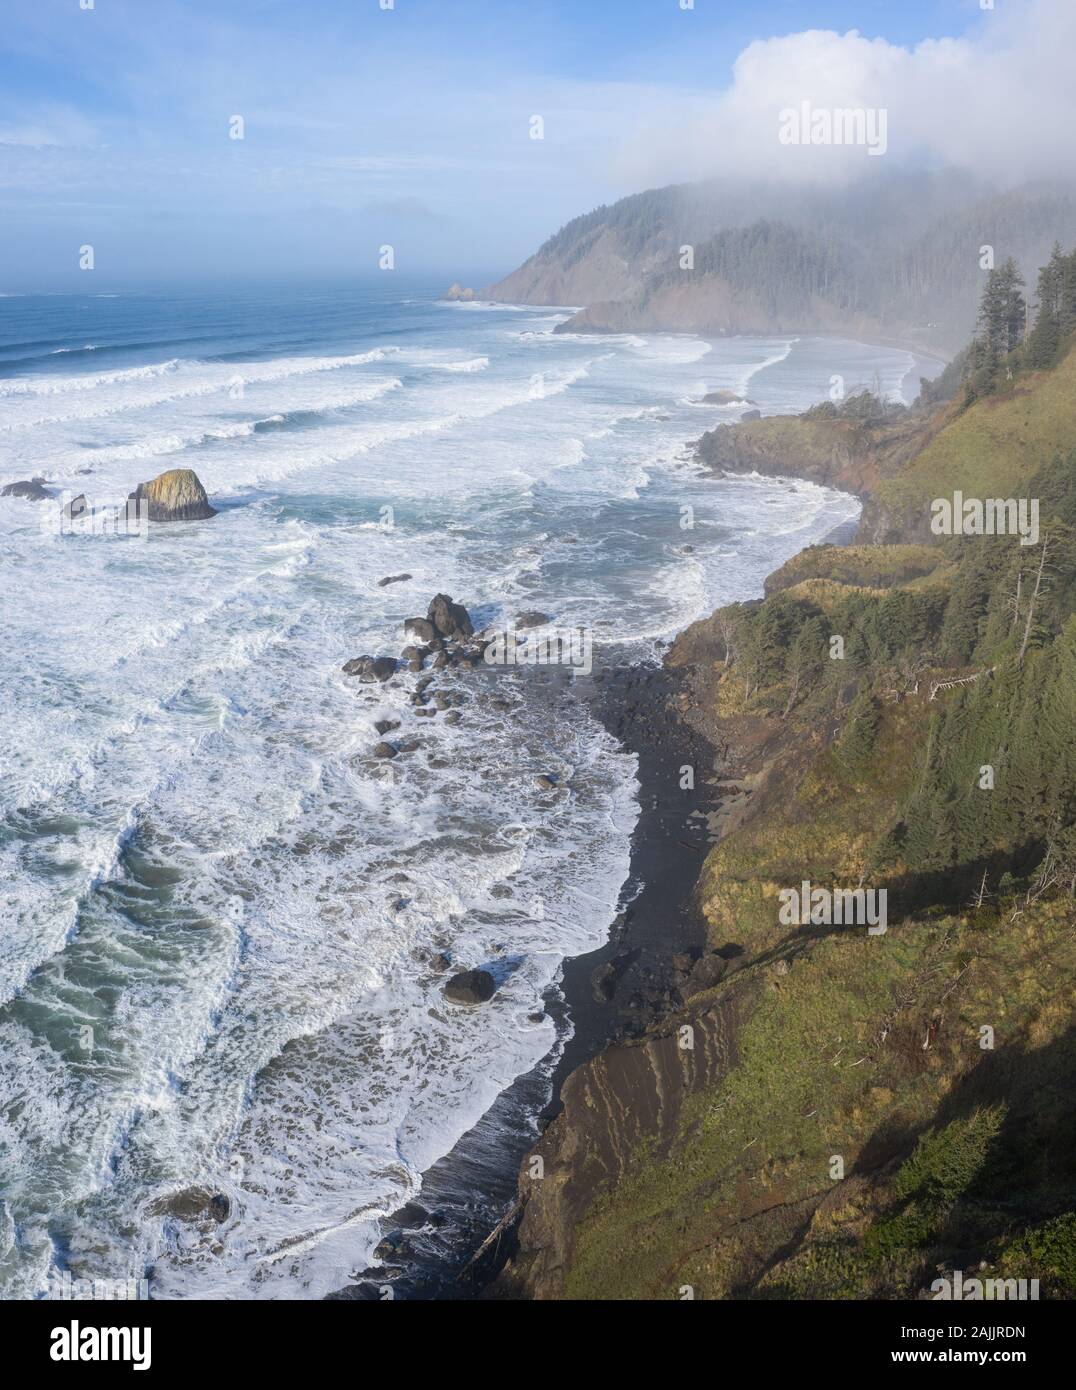 The Pacific Ocean washes against the rocky coastline of northern Oregon. This beautiful, wild region is often covered by a dark foggy marine layer. Stock Photo